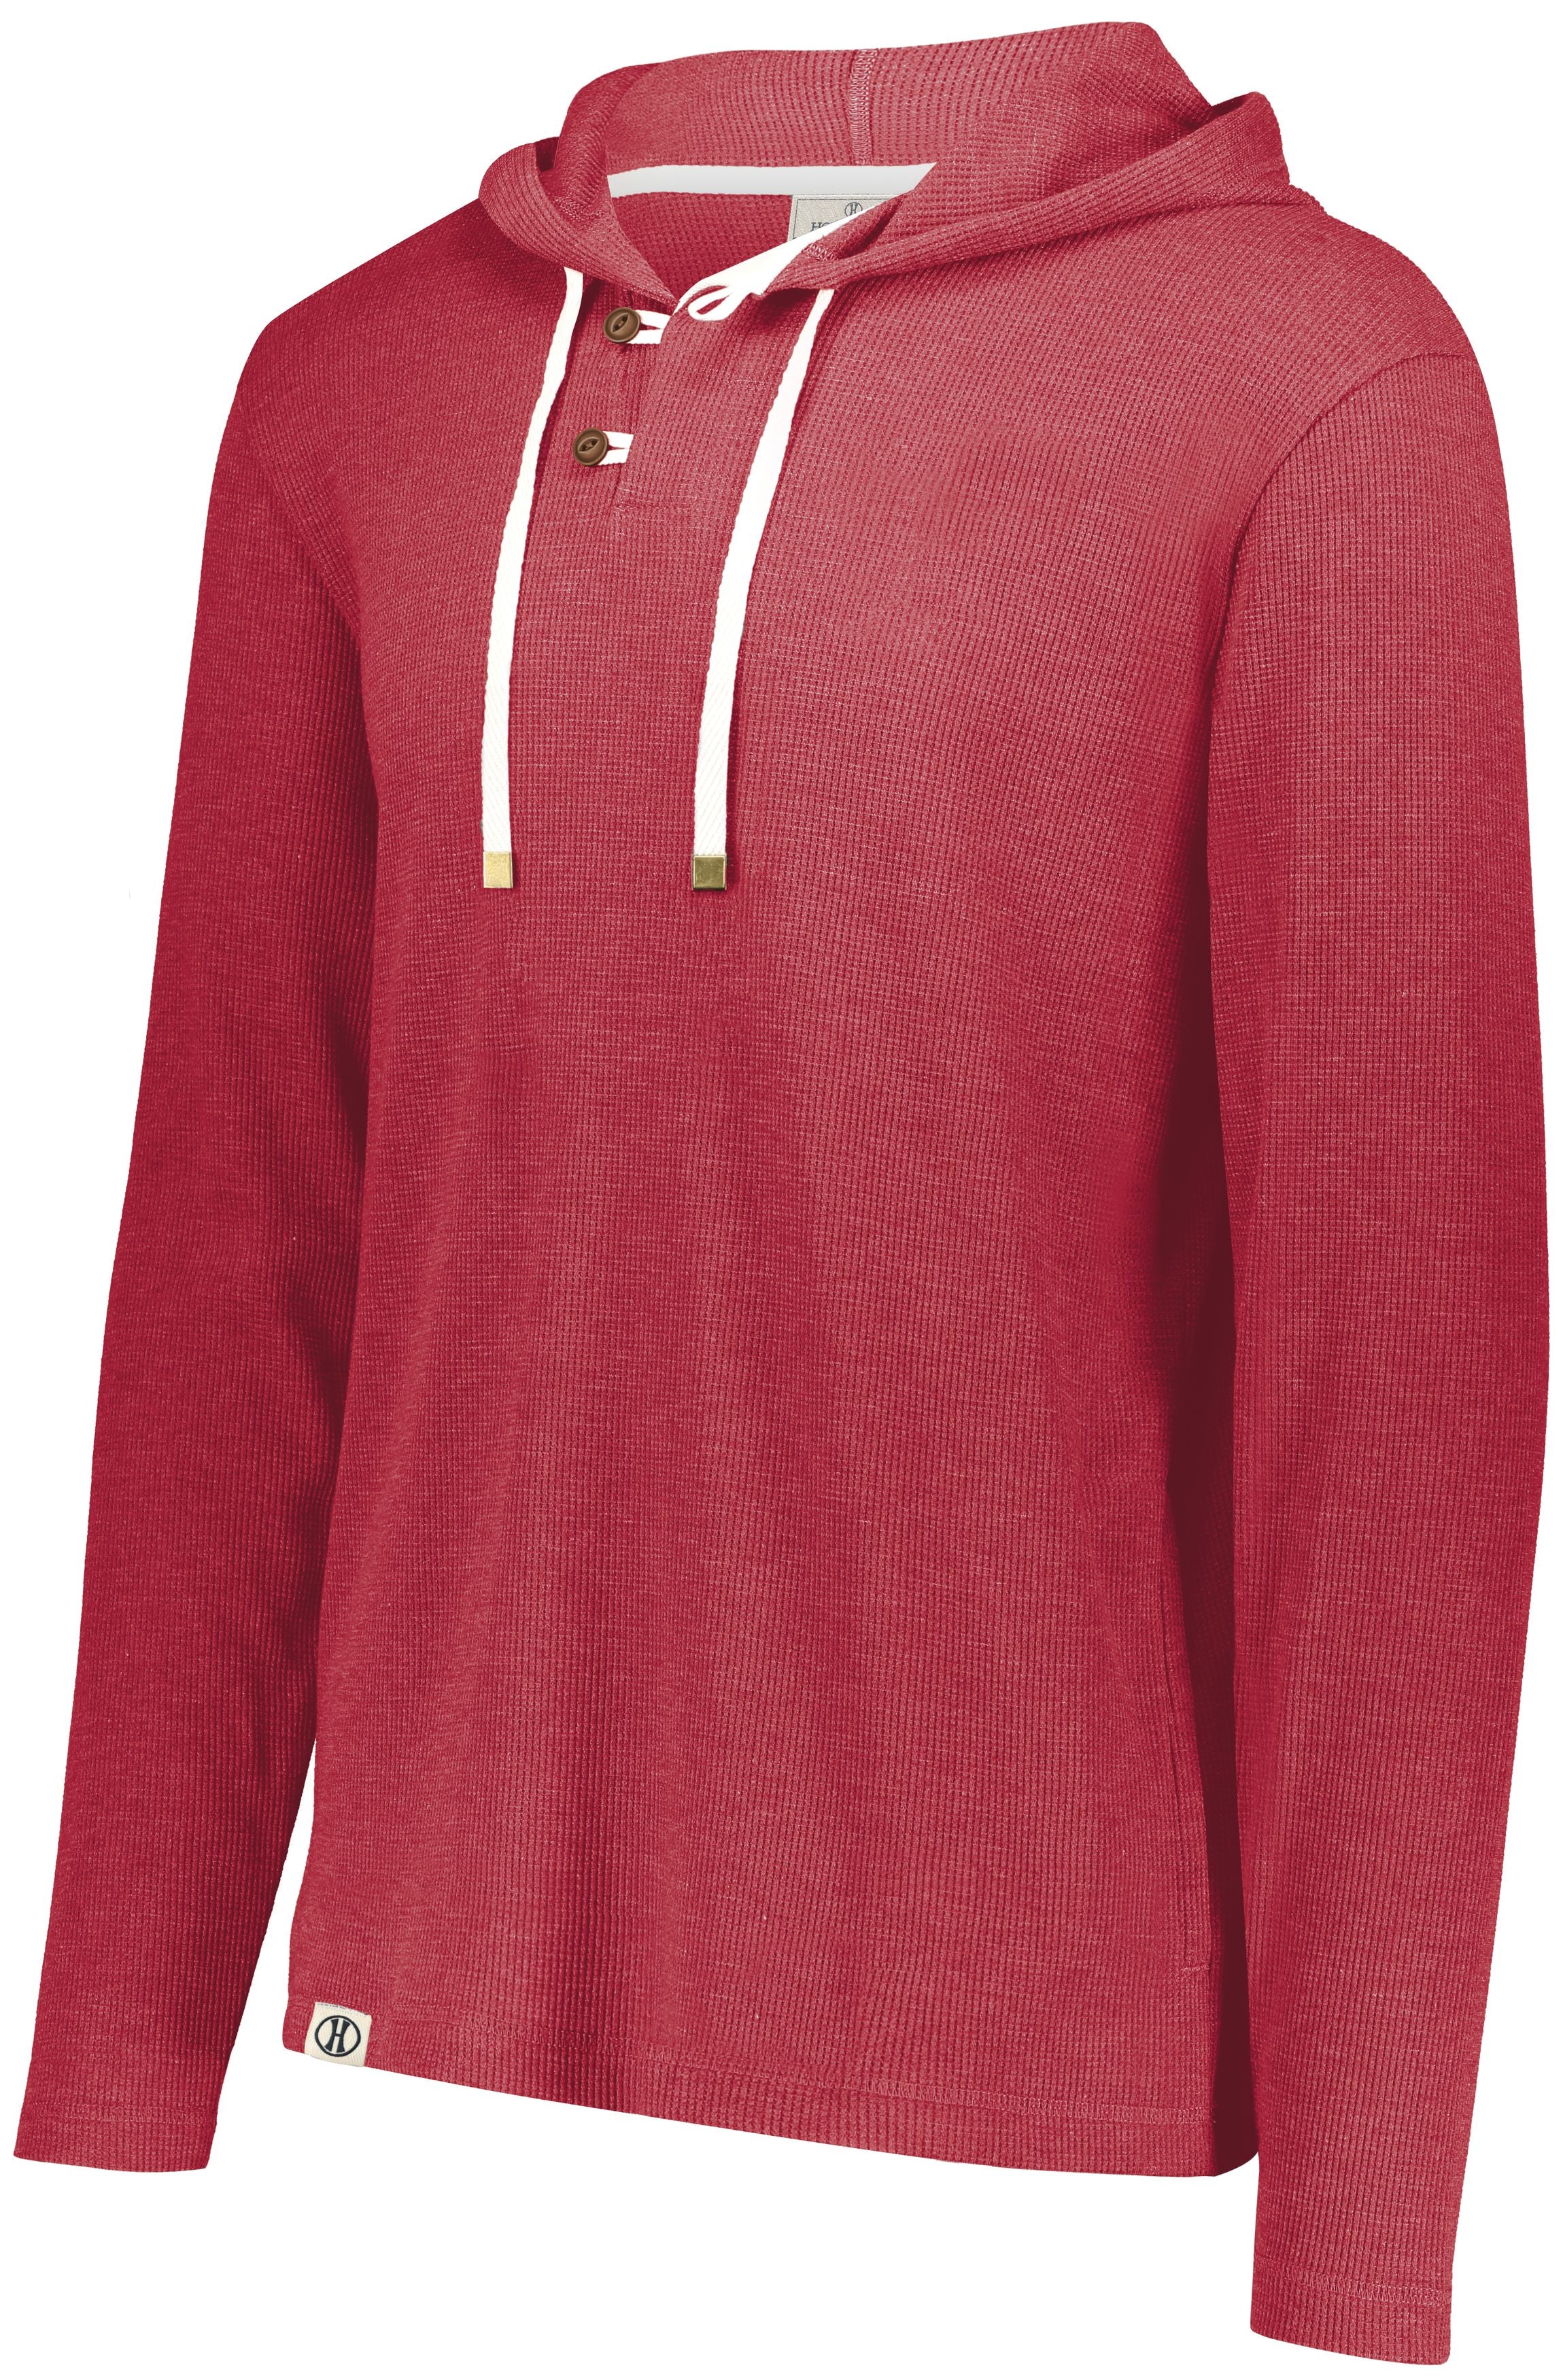 Holloway Coast Hoodie in Scarlet Heather  -Part of the Adult, Holloway, Shirts product lines at KanaleyCreations.com